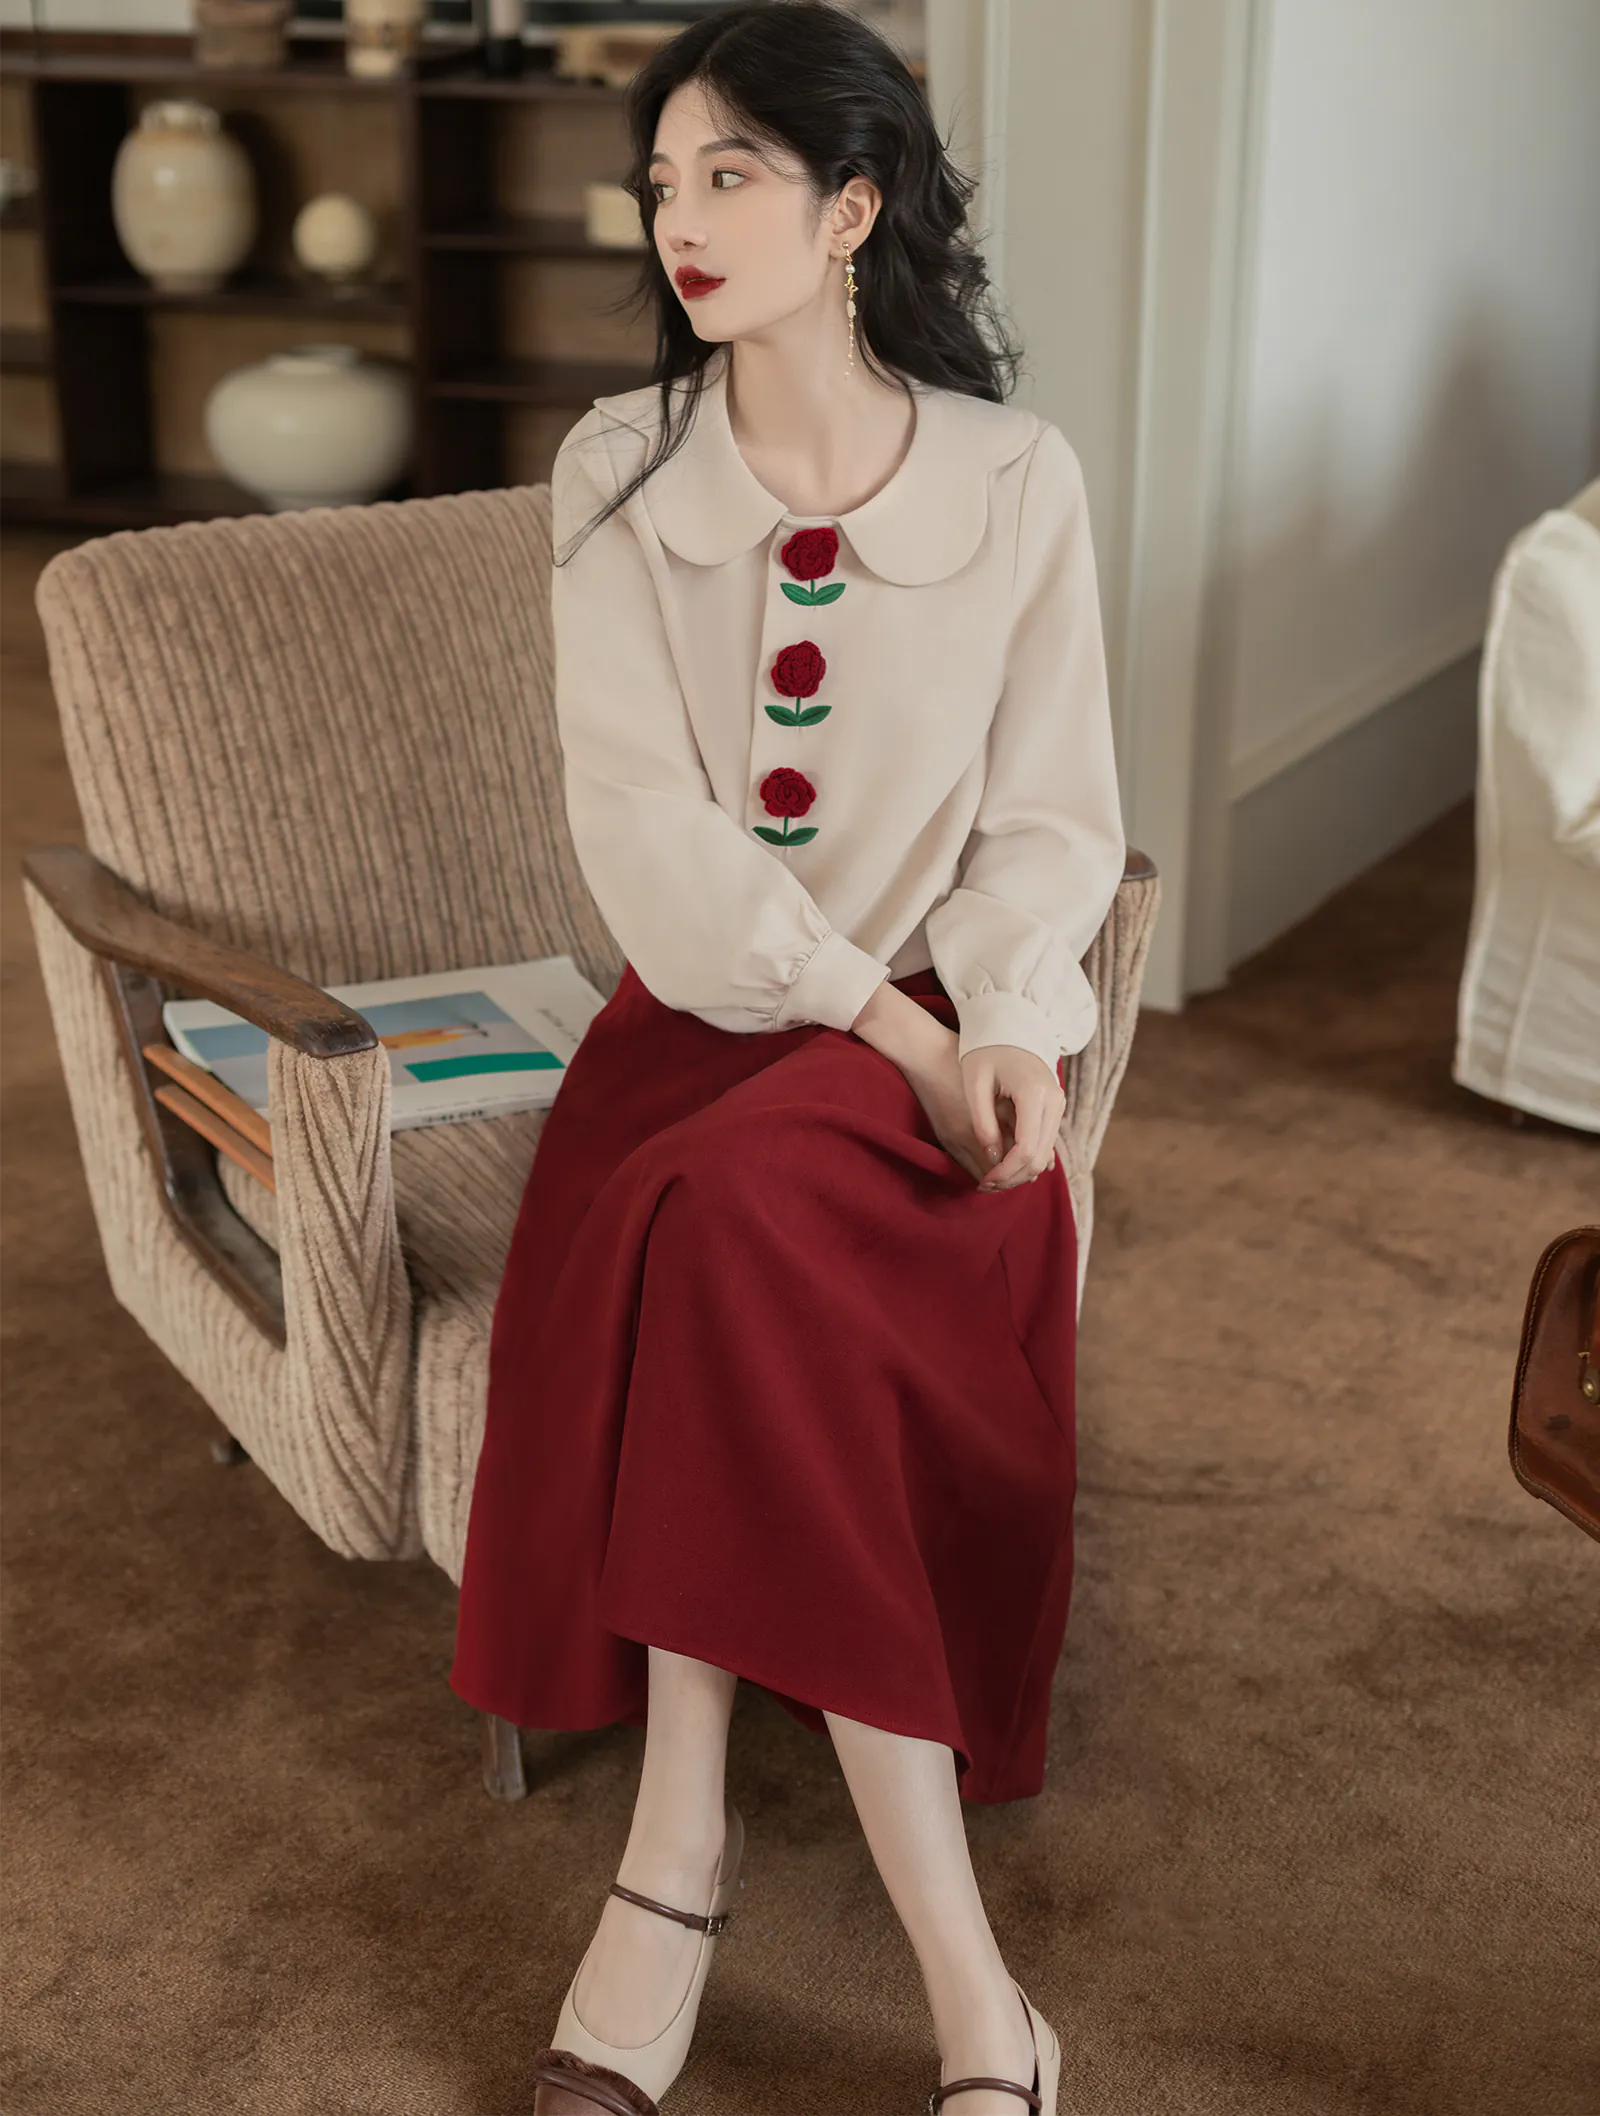 Retro Rose Floral Embroidery Doll Neck Top with Red Skirt Casual Suit02